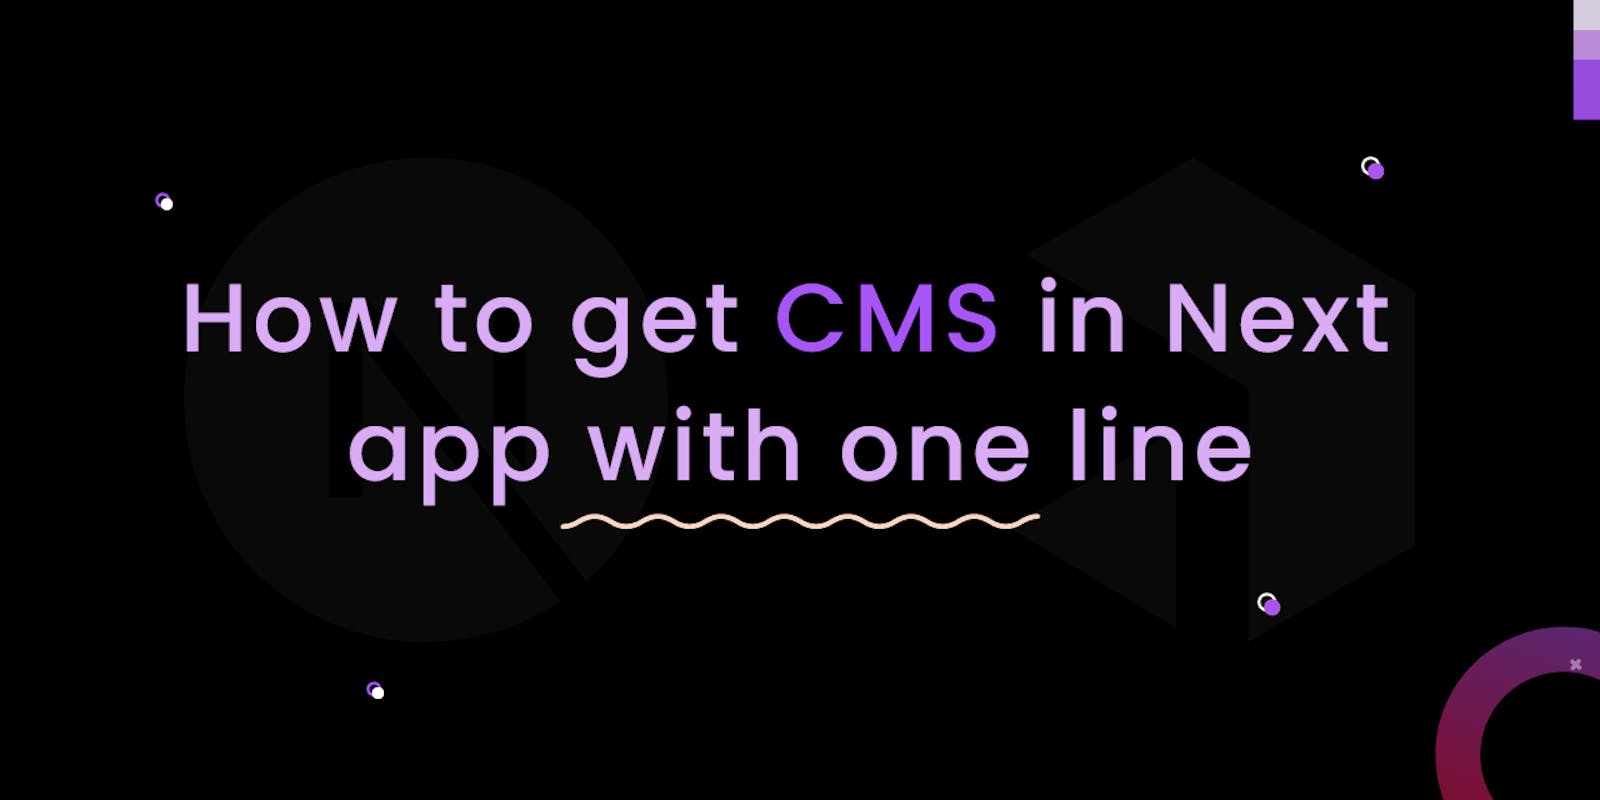 How to get CMS in any Next app with one line